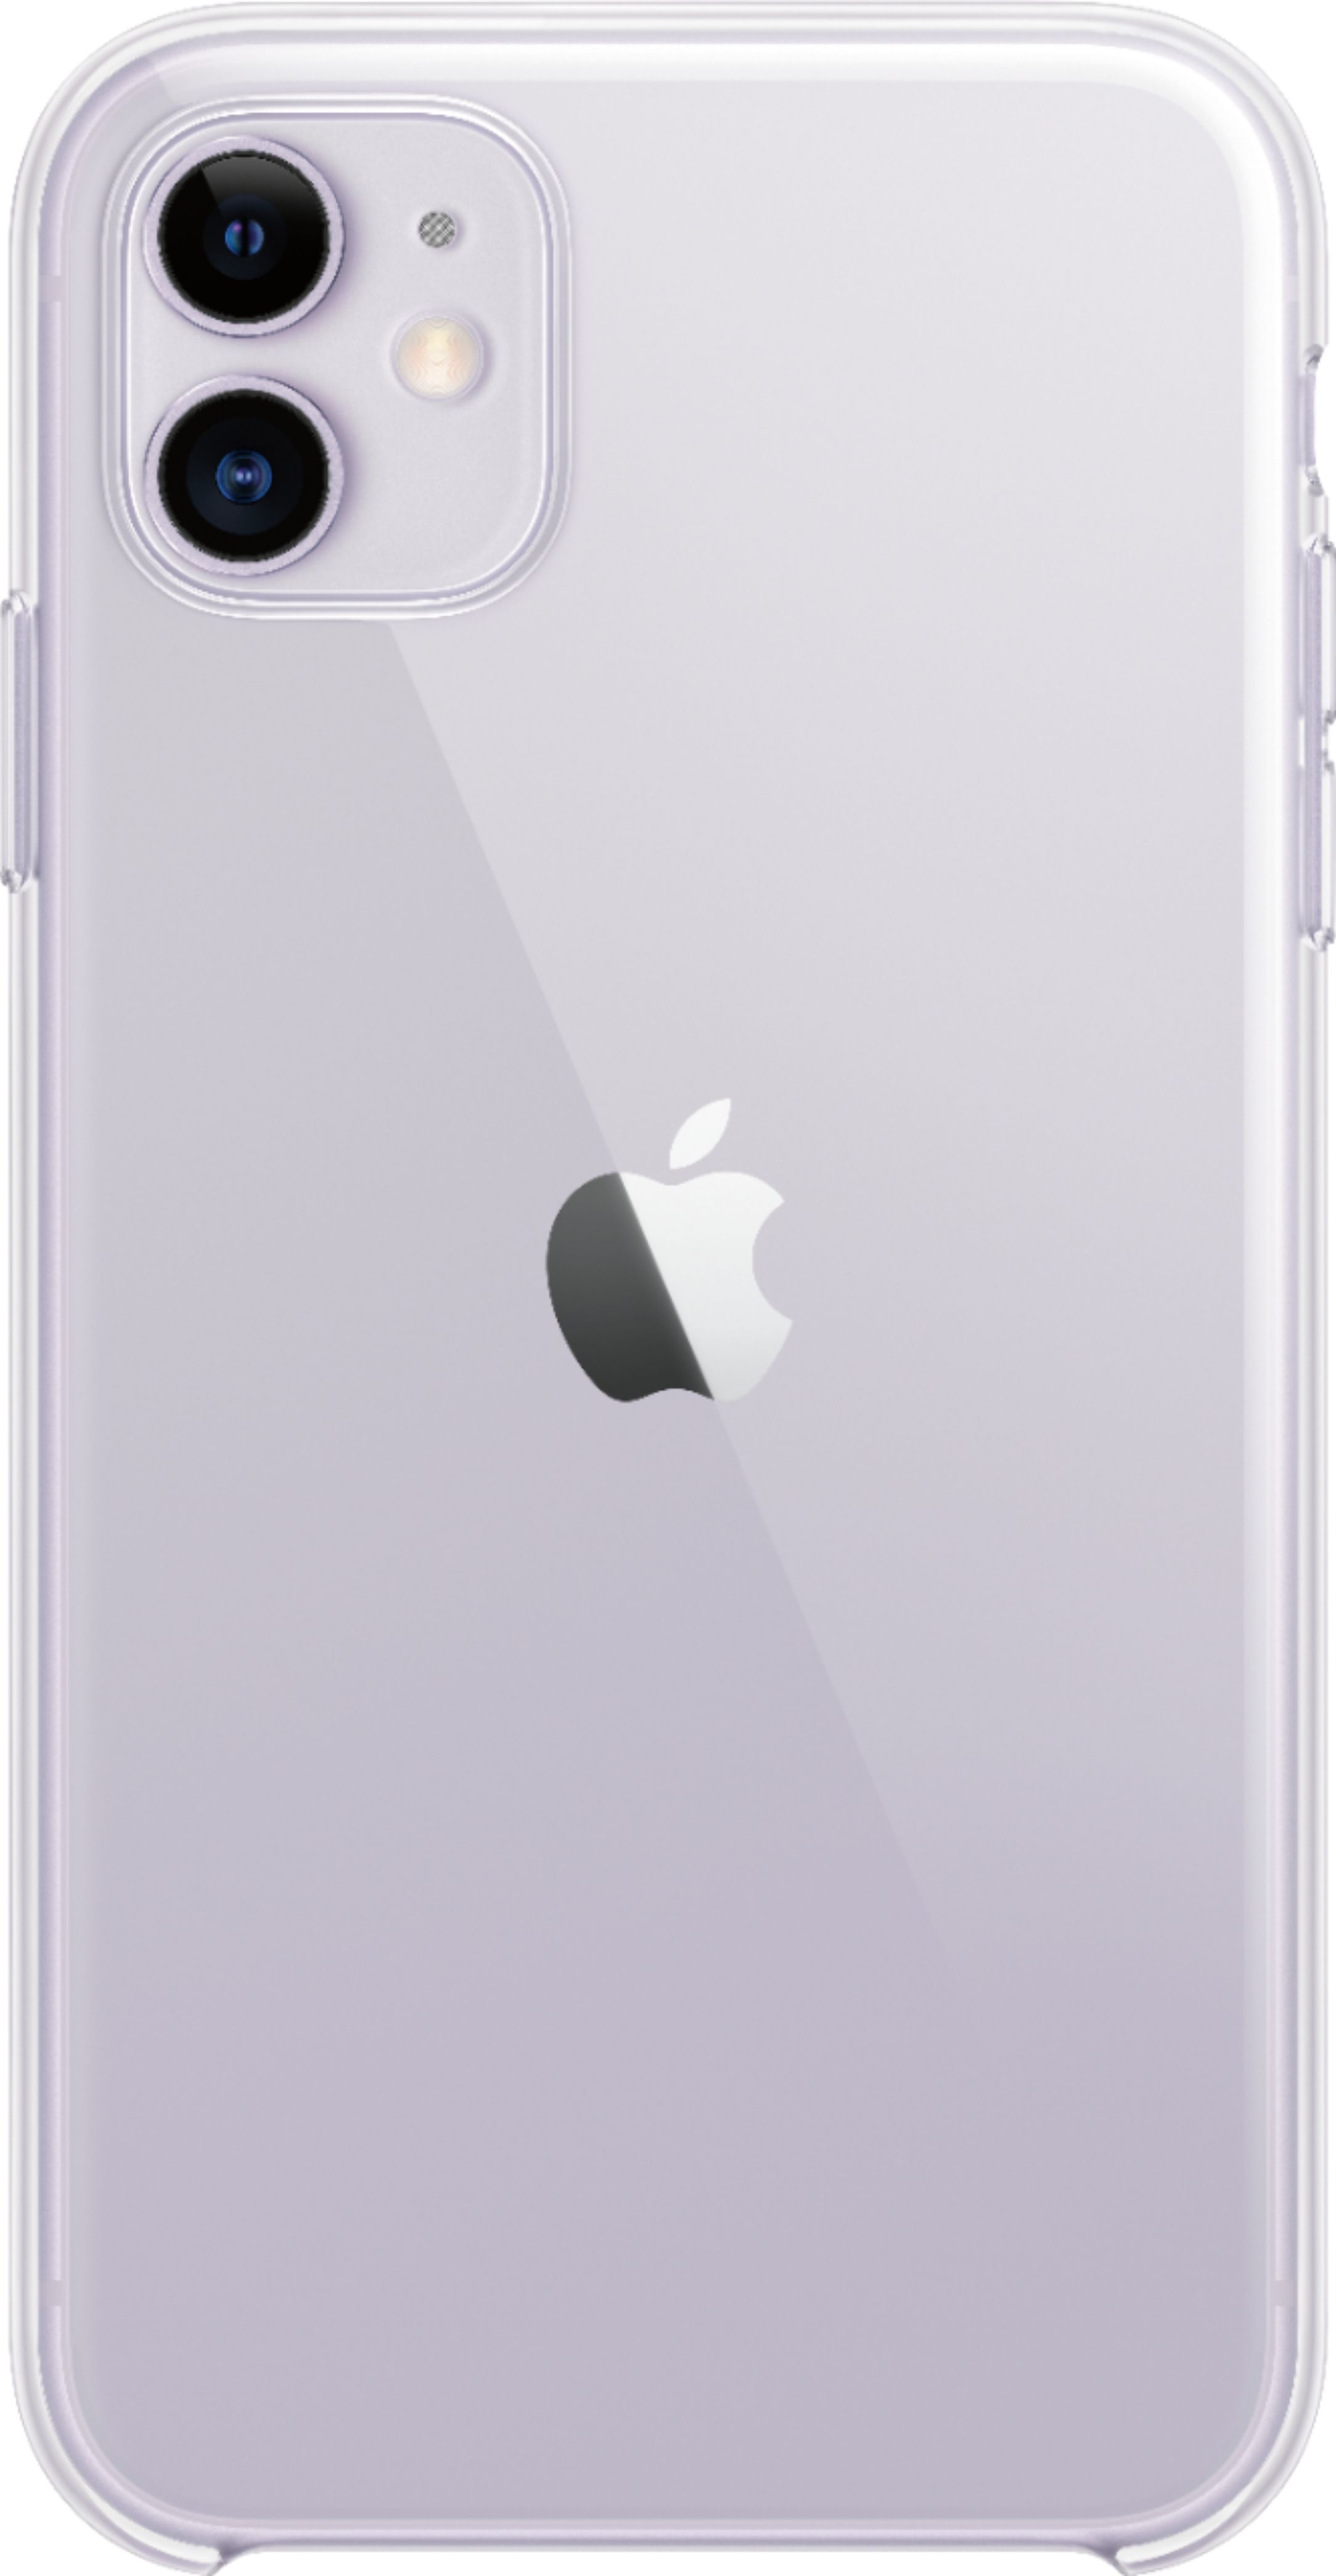 Apple Iphone 11 Clear Case Mwvg2zm A Best Buy